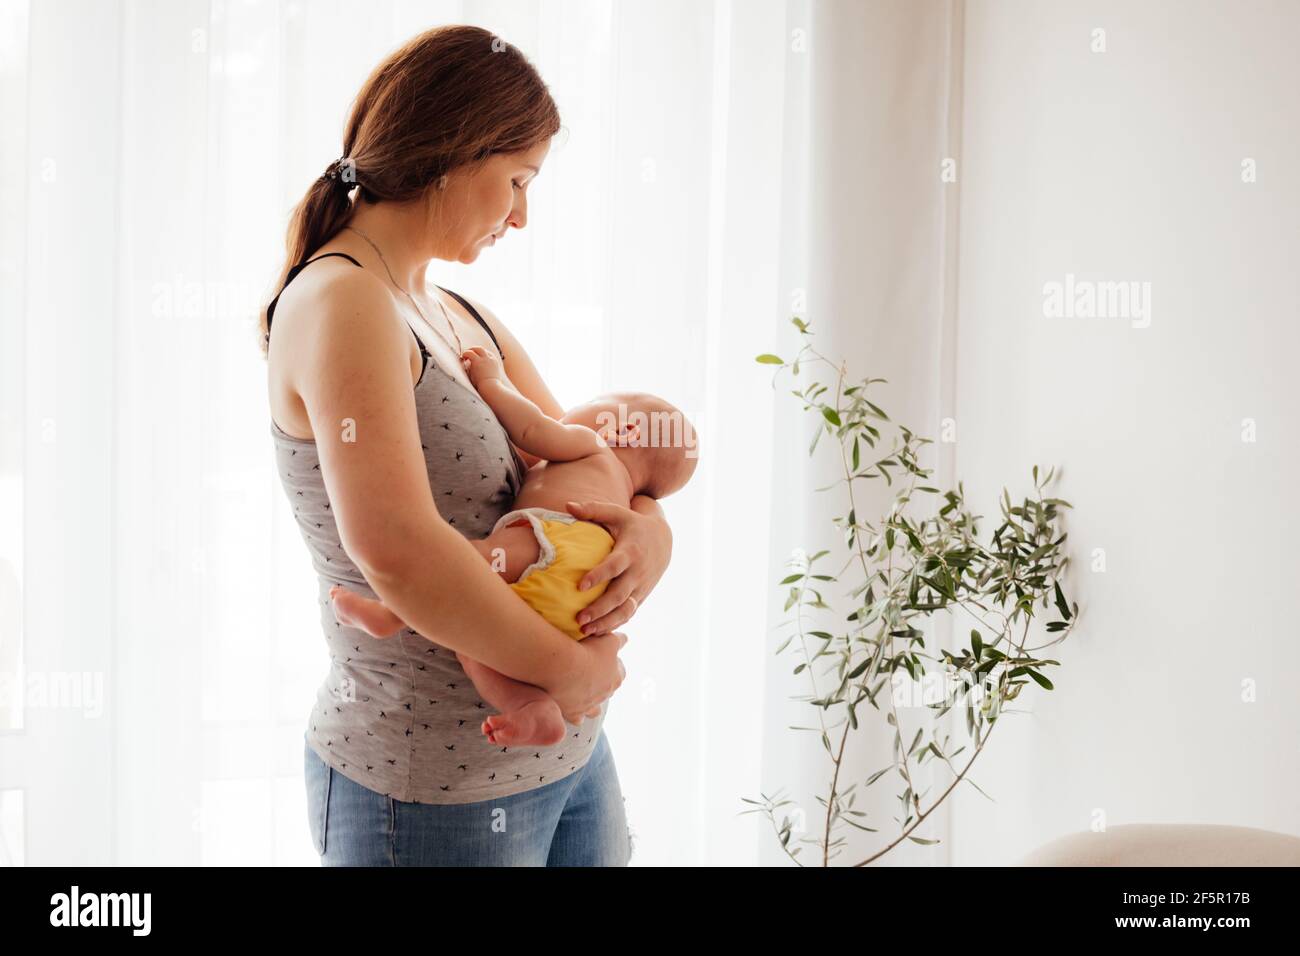 Woman in postpartum depression feeling unemotional and exhausted Stock Photo